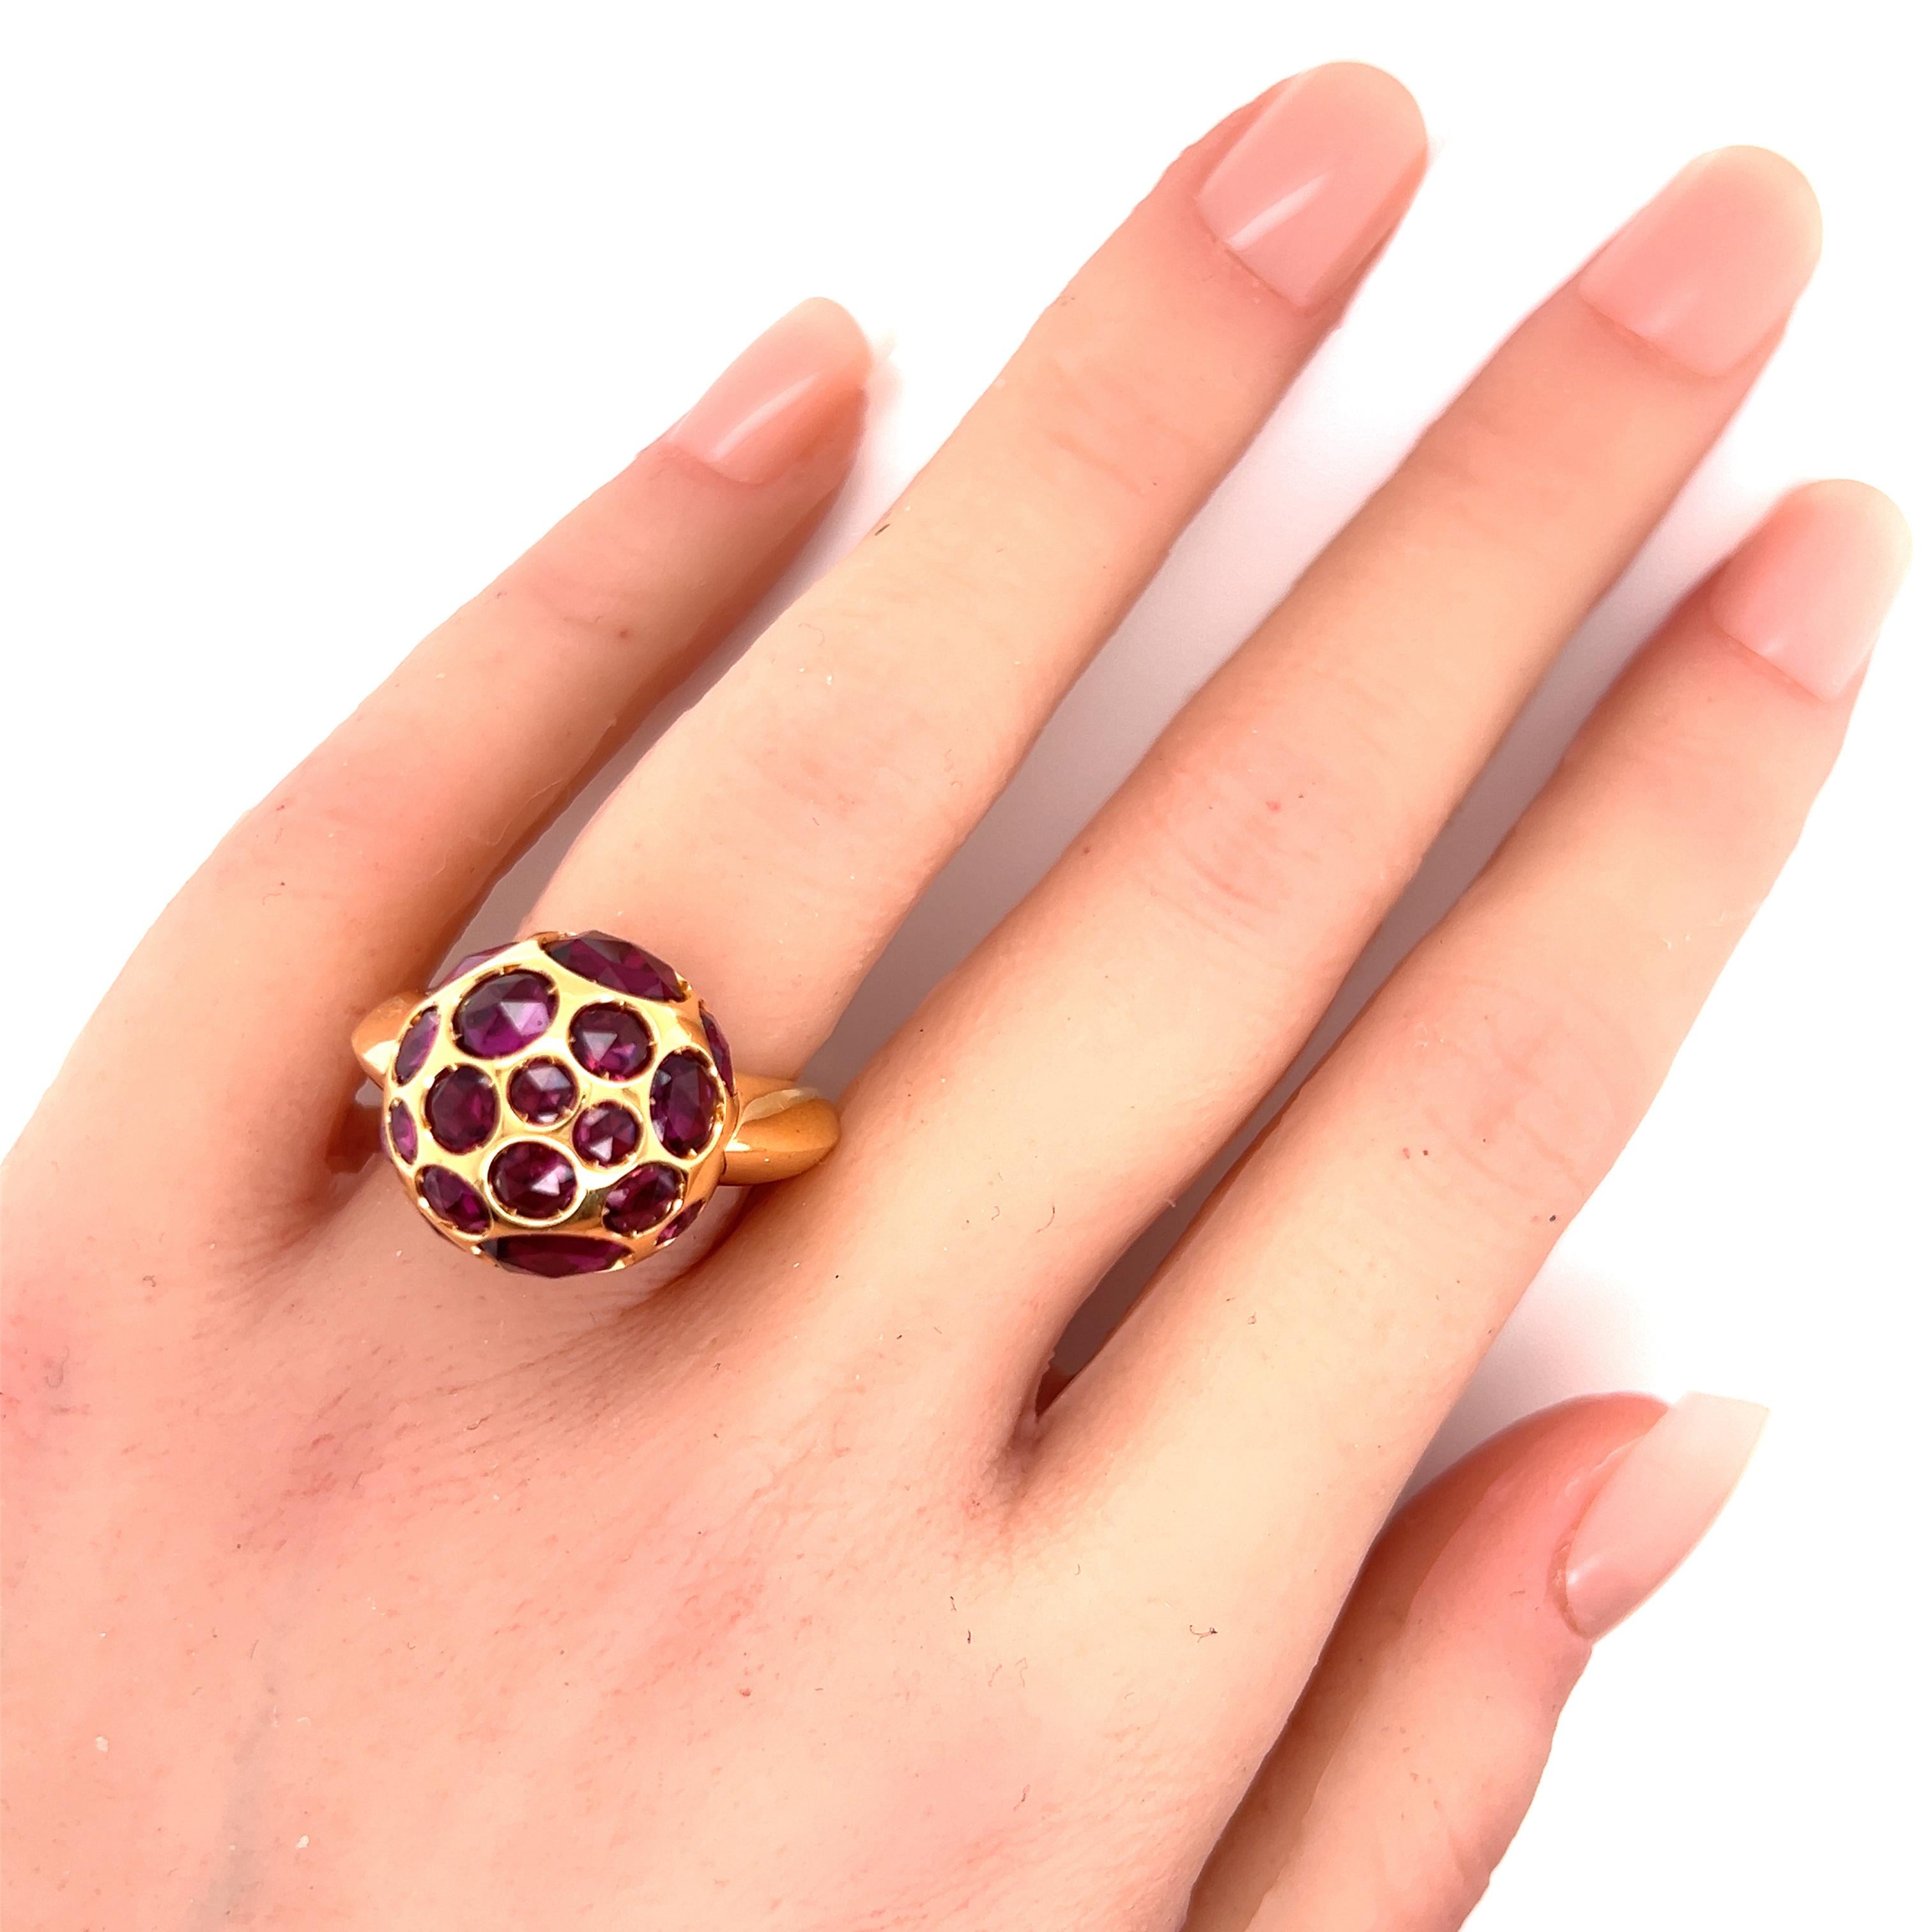 Brand:  Pomellato 
Hallmark: Pomellato 750 C700004438
Gemstone: rhodolite garnet 
Material: 18k rose gold 
Measurement:  top: 17mm round 
Ring size:  6.5
Weight: 19.6 grams

This is a gorgeous authentic ring by designer Pomellato from her Harem